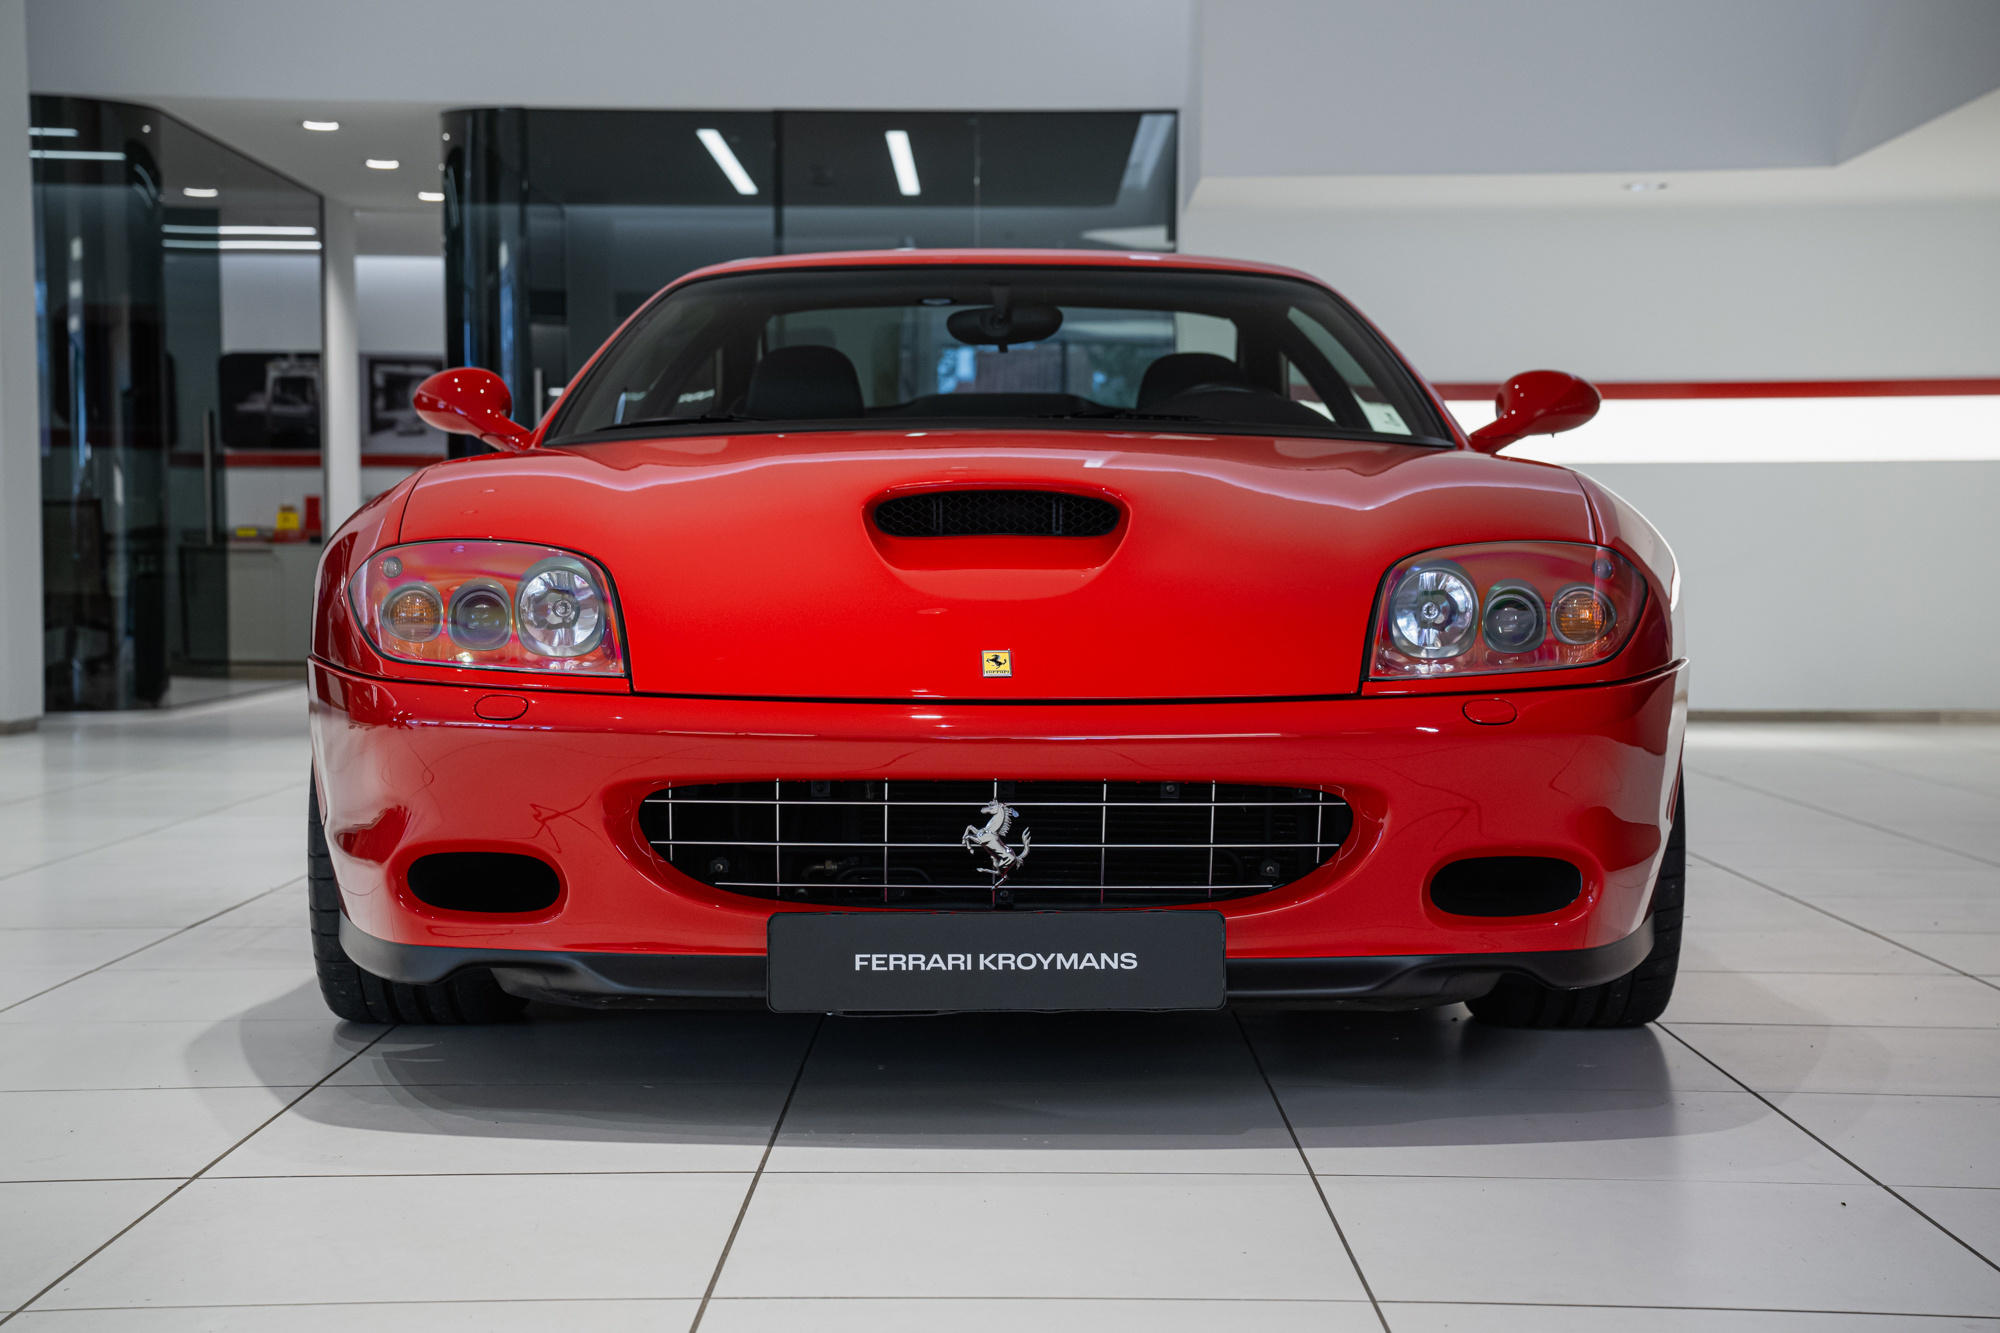 Used 575M Maranello 2004 for sale in Hilversum Netherlands